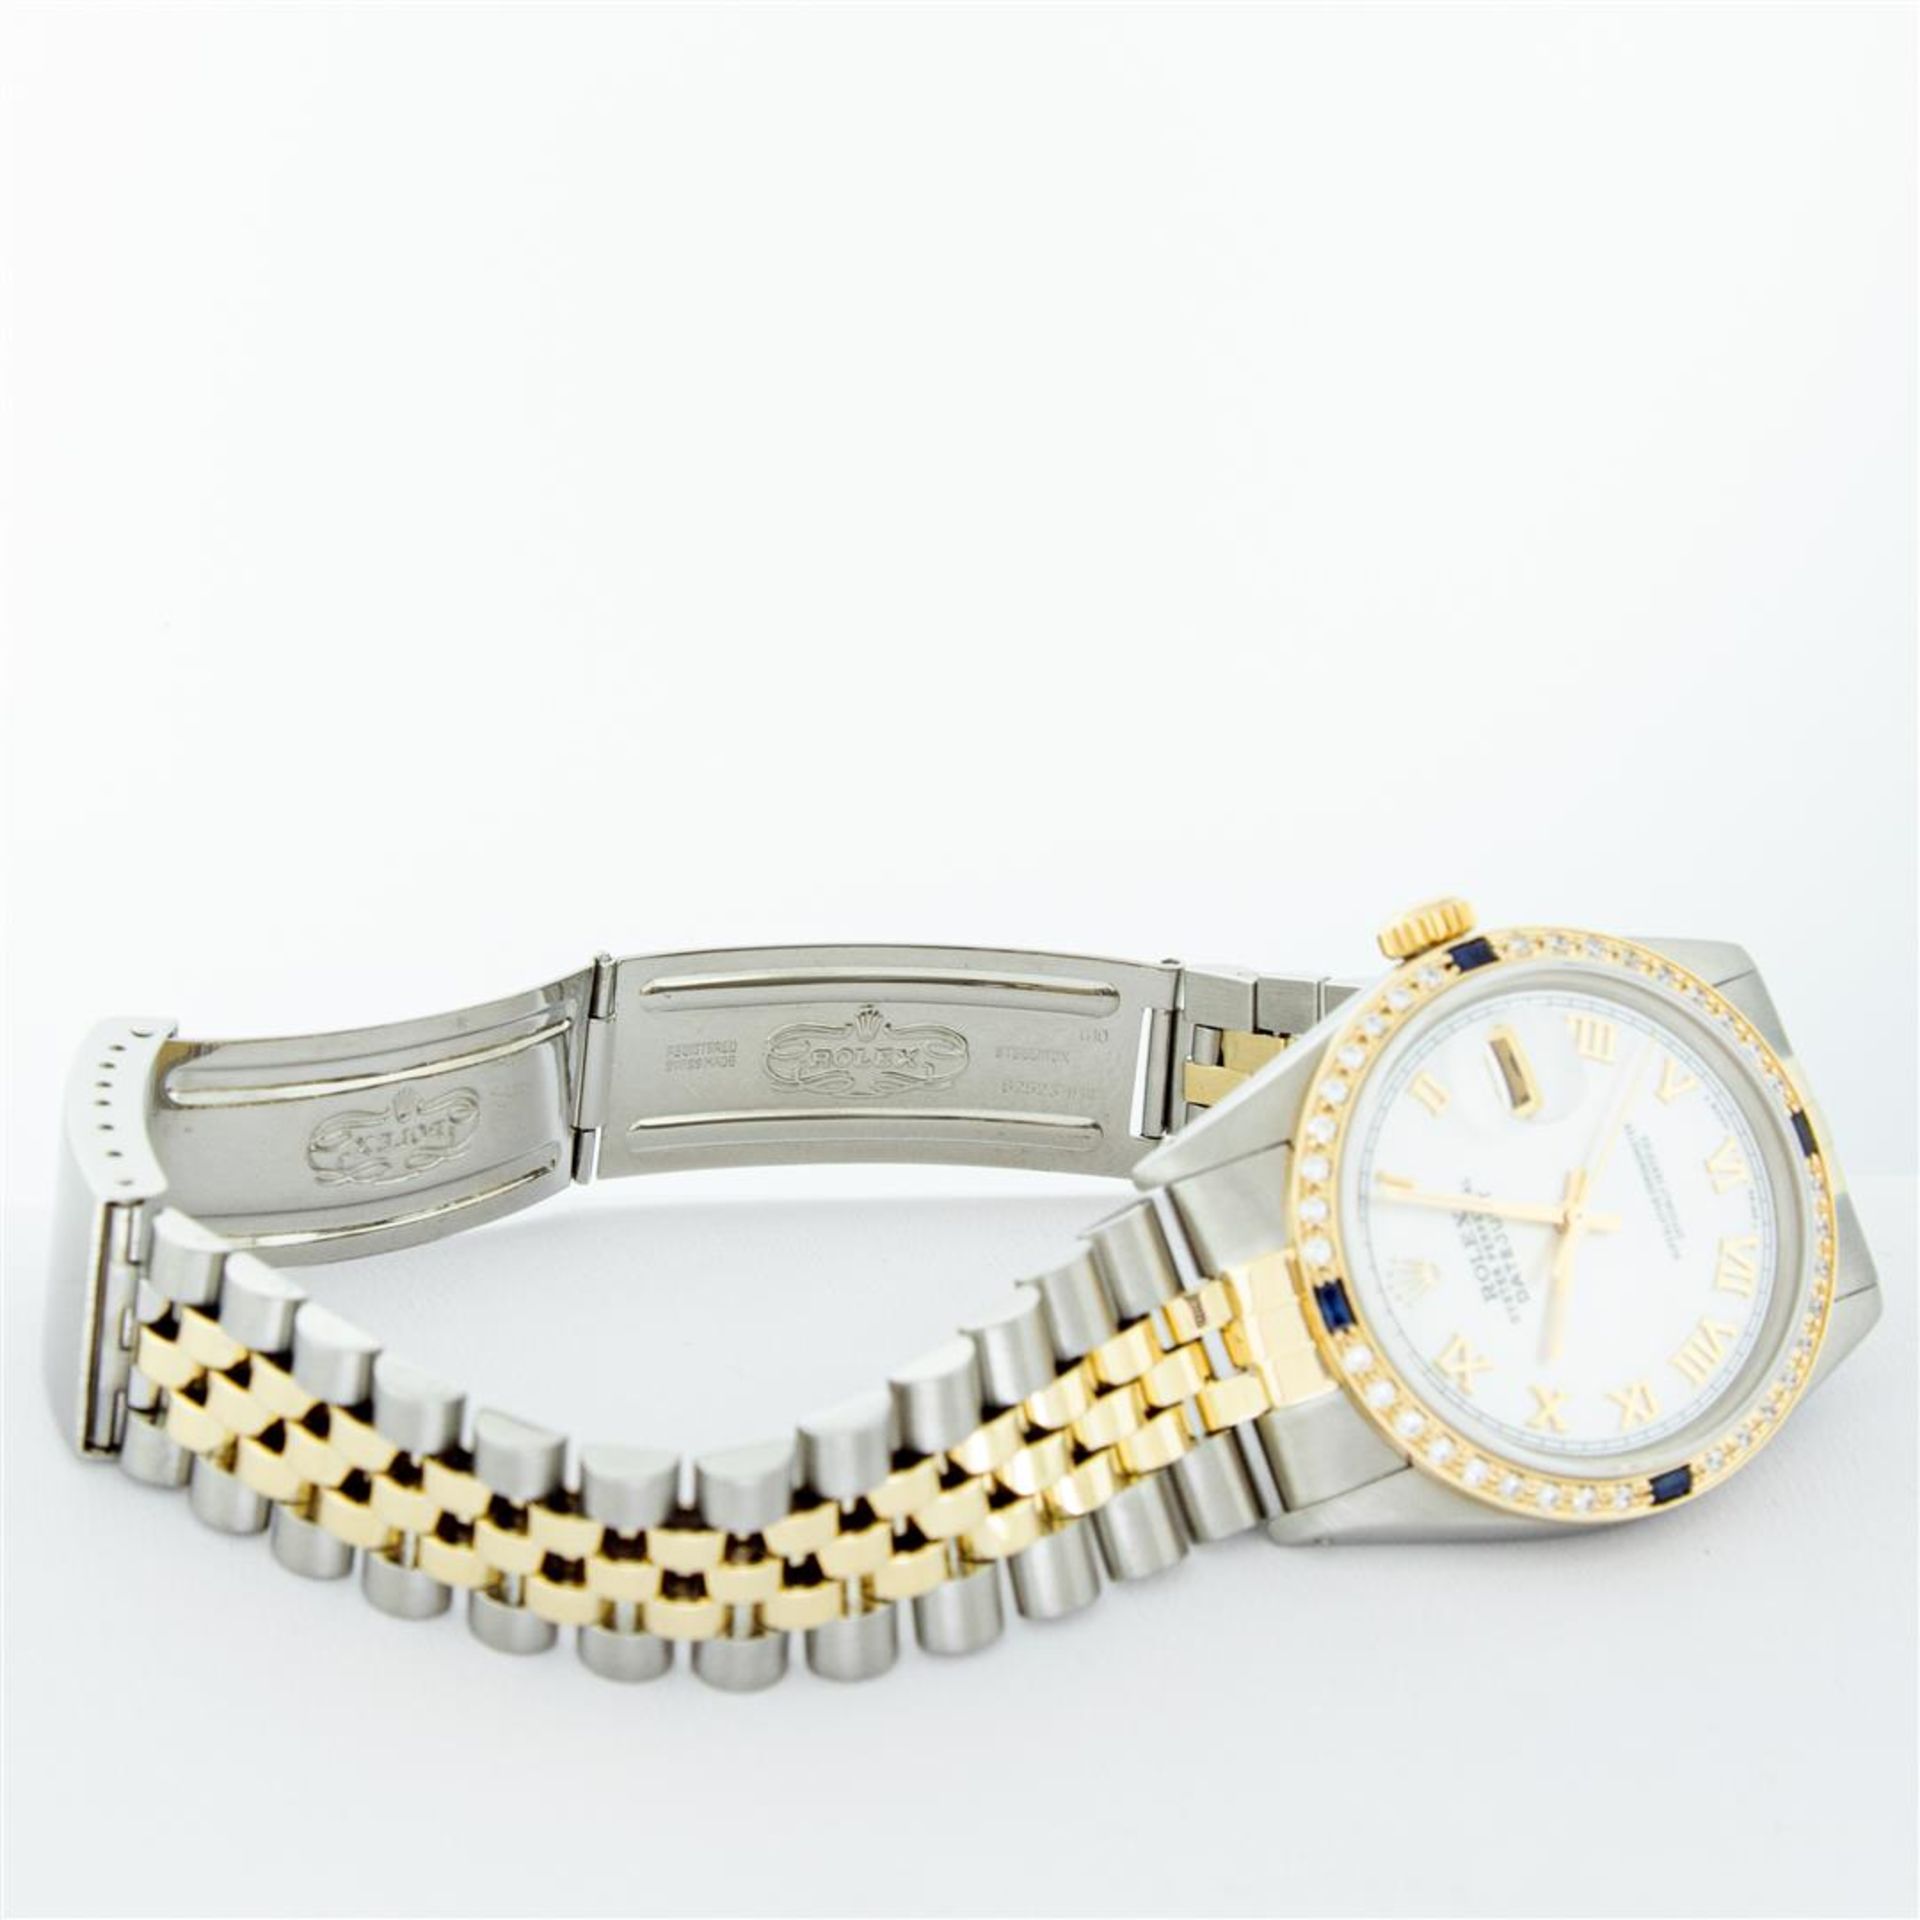 Rolex Mens 2 Tone Mother Of Pearl Diamond & Sapphire 36MM Datejust Wristwatch - Image 9 of 9